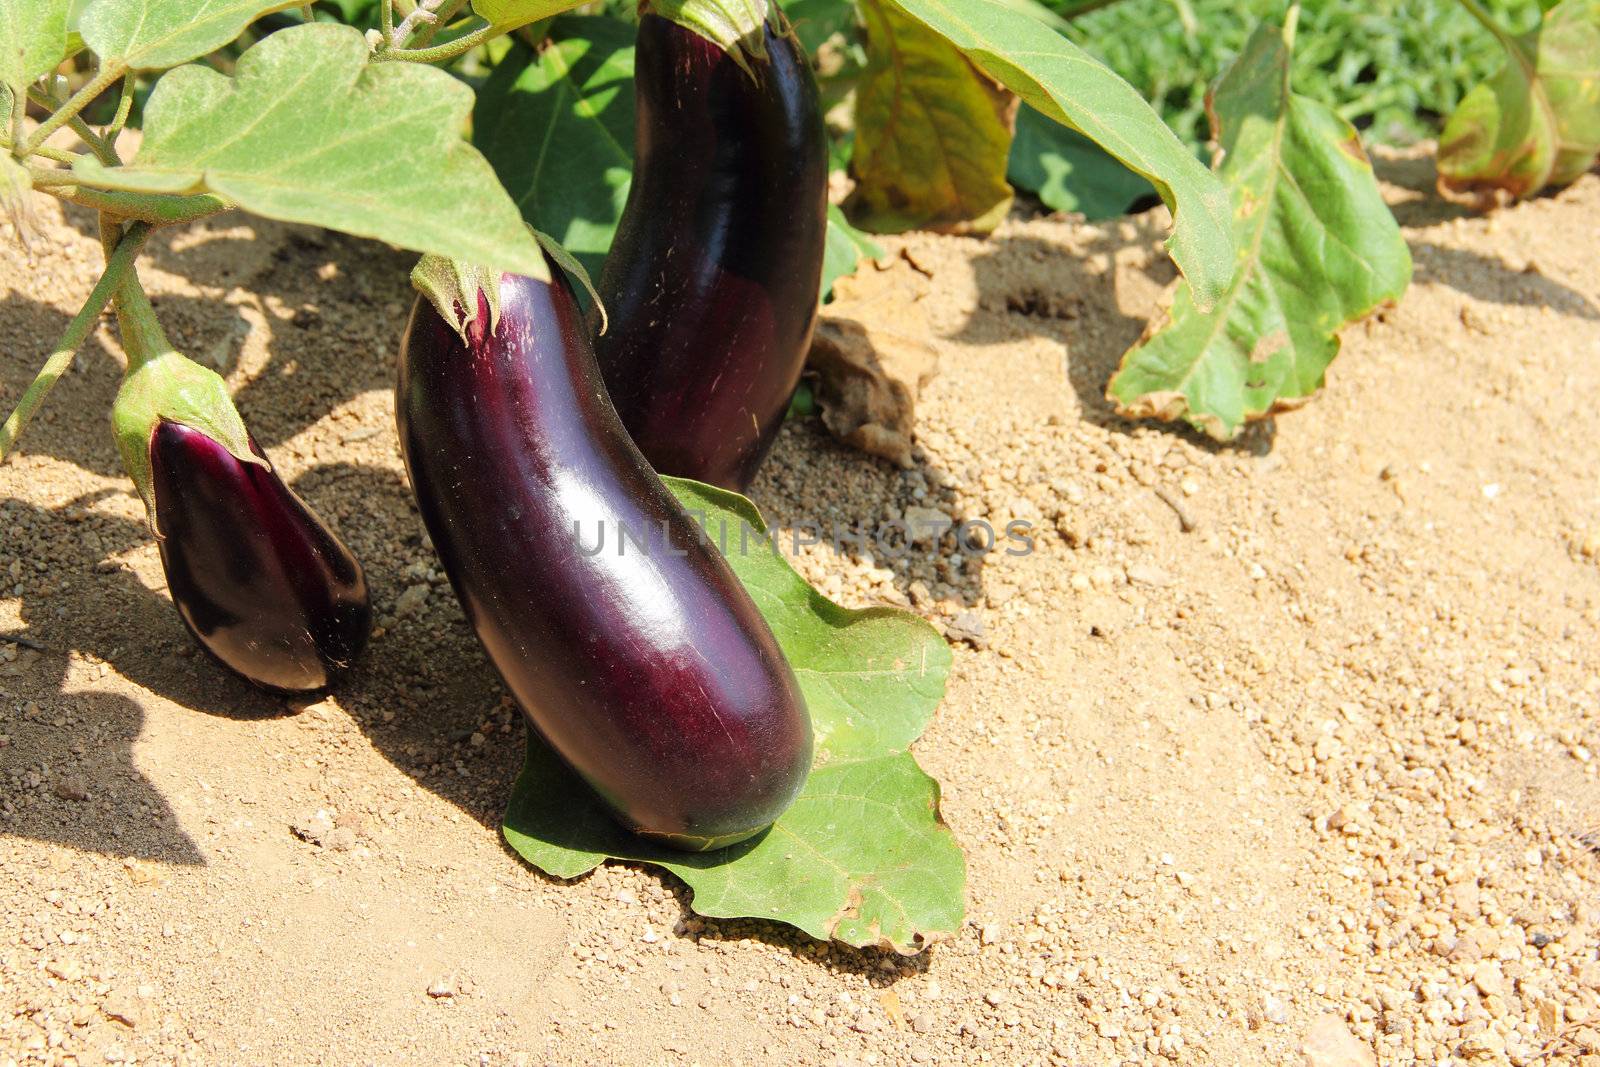 Eggplant fruits growing in the garden close up